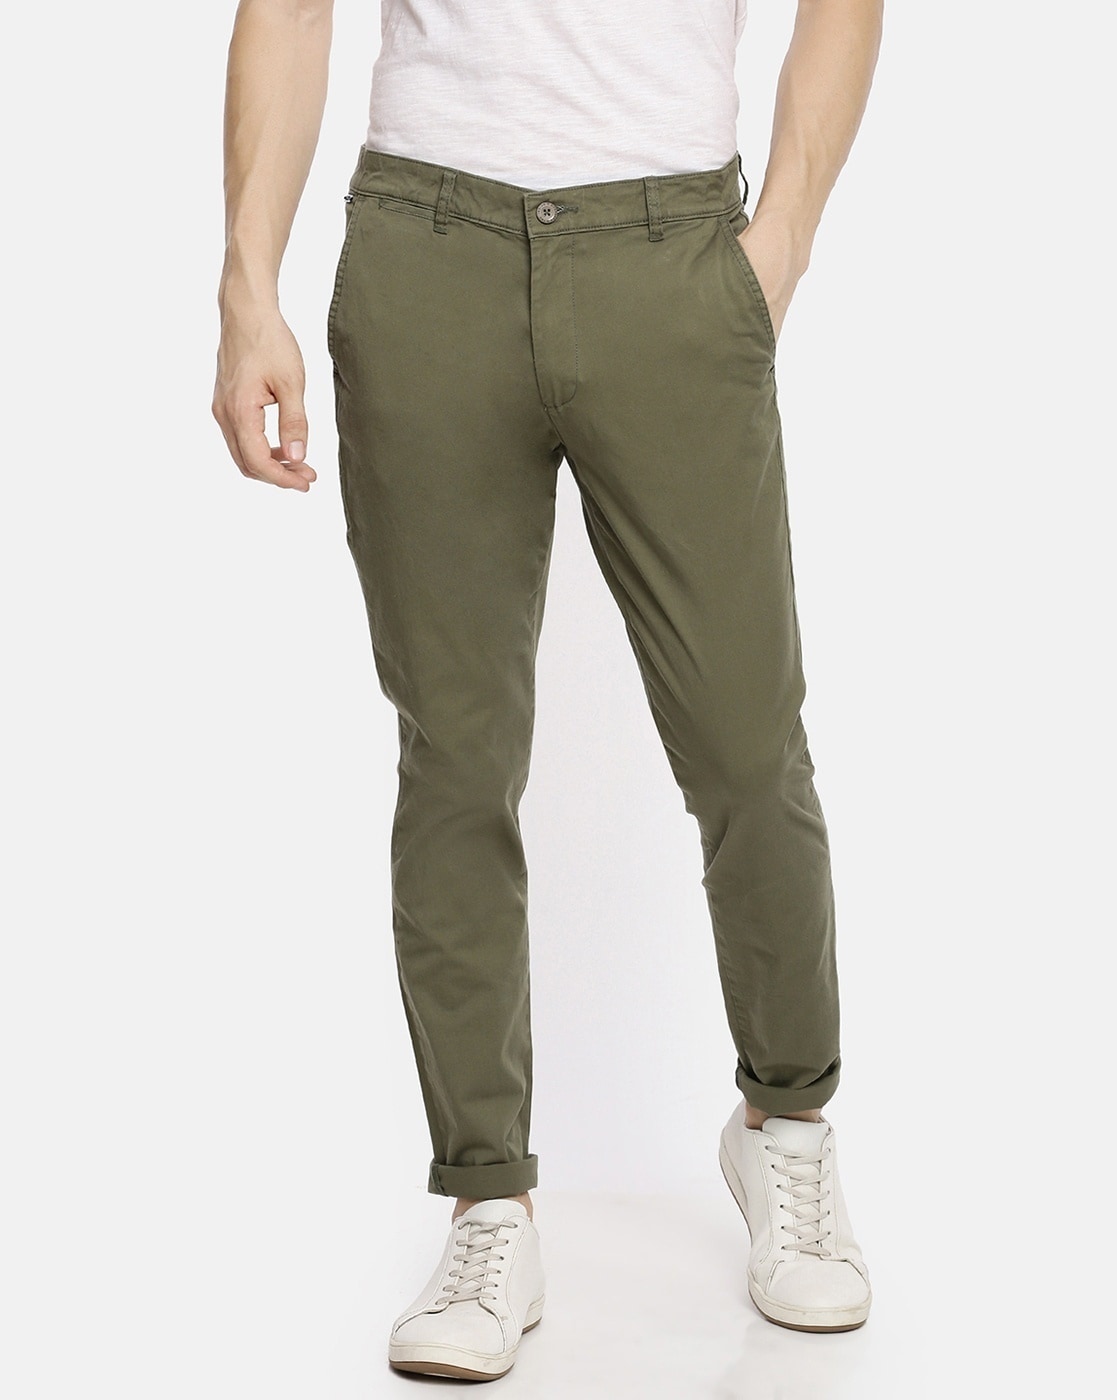 Pacelli Olive Green Pleated Baggy Fit Dress Pants 810004